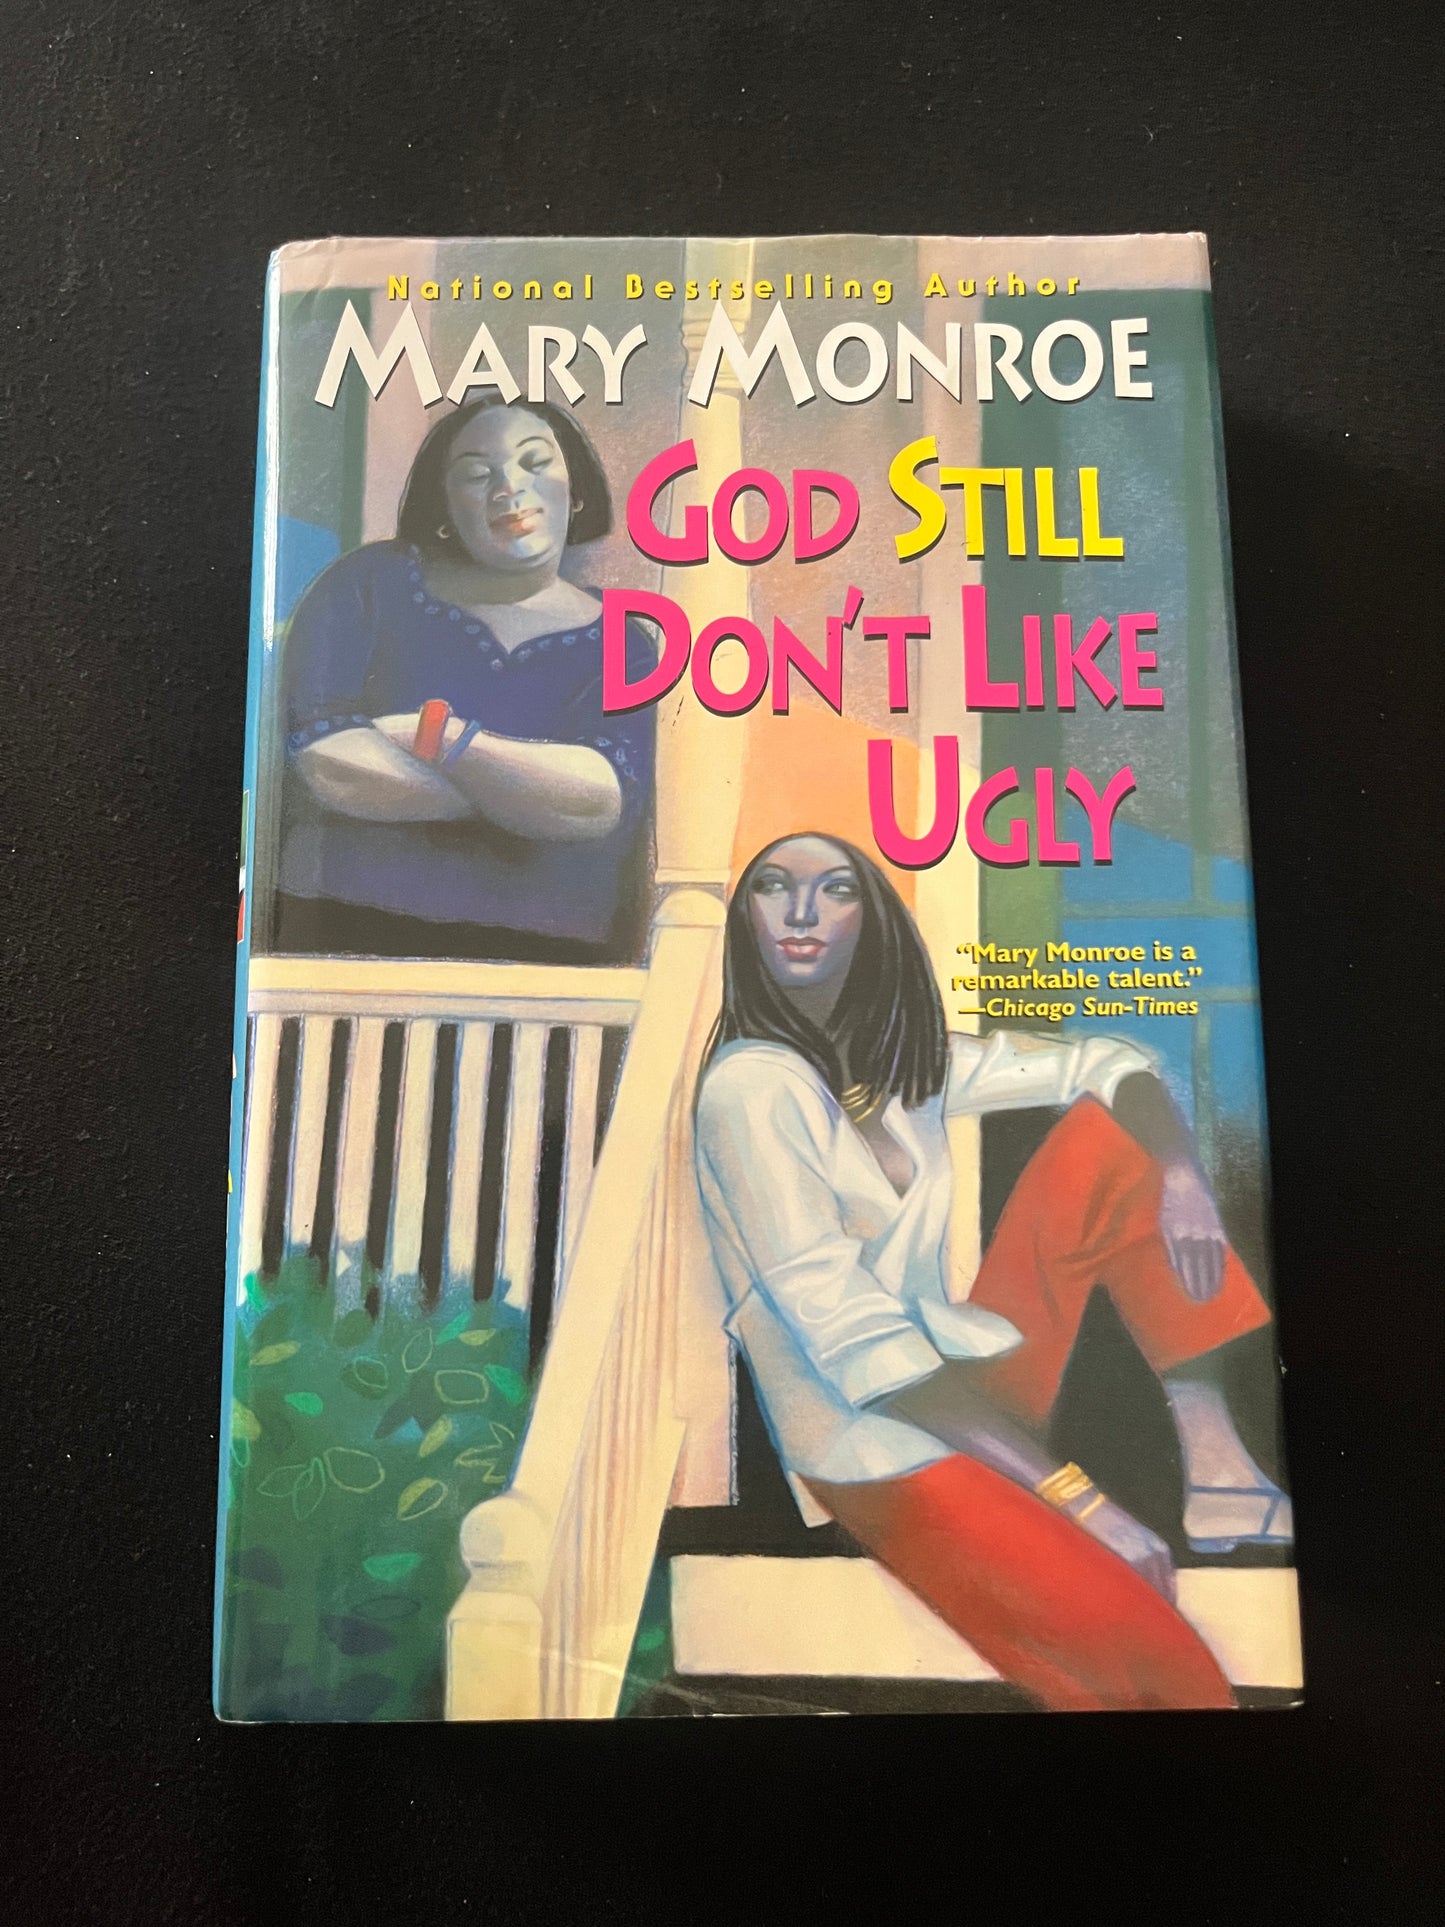 GOD STILL DON'T LIKE UGLY by Mary Monroe